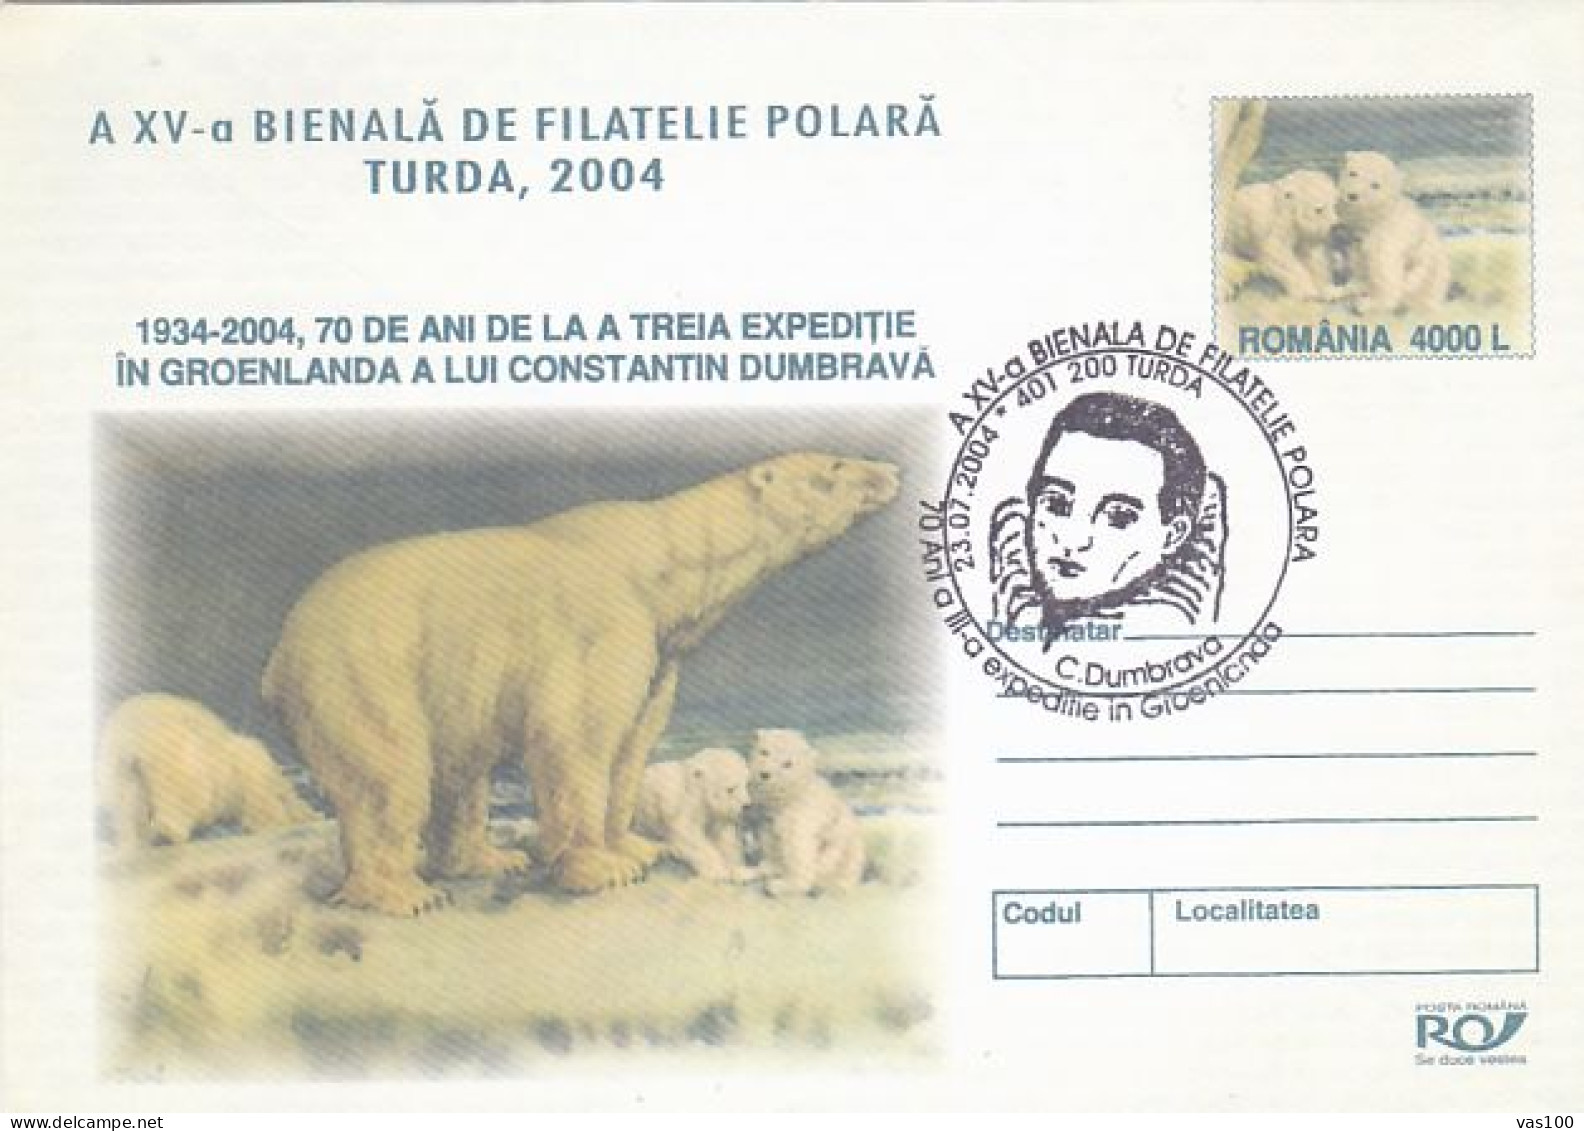 NORTH POLE, ARCTIC EXPEDITION, C. DUMBRAVA IN GREENLAND, POLAR BEAR, COVER STATIONERY, ENTIER POSTAL, 2004, ROMANIA - Arctic Expeditions